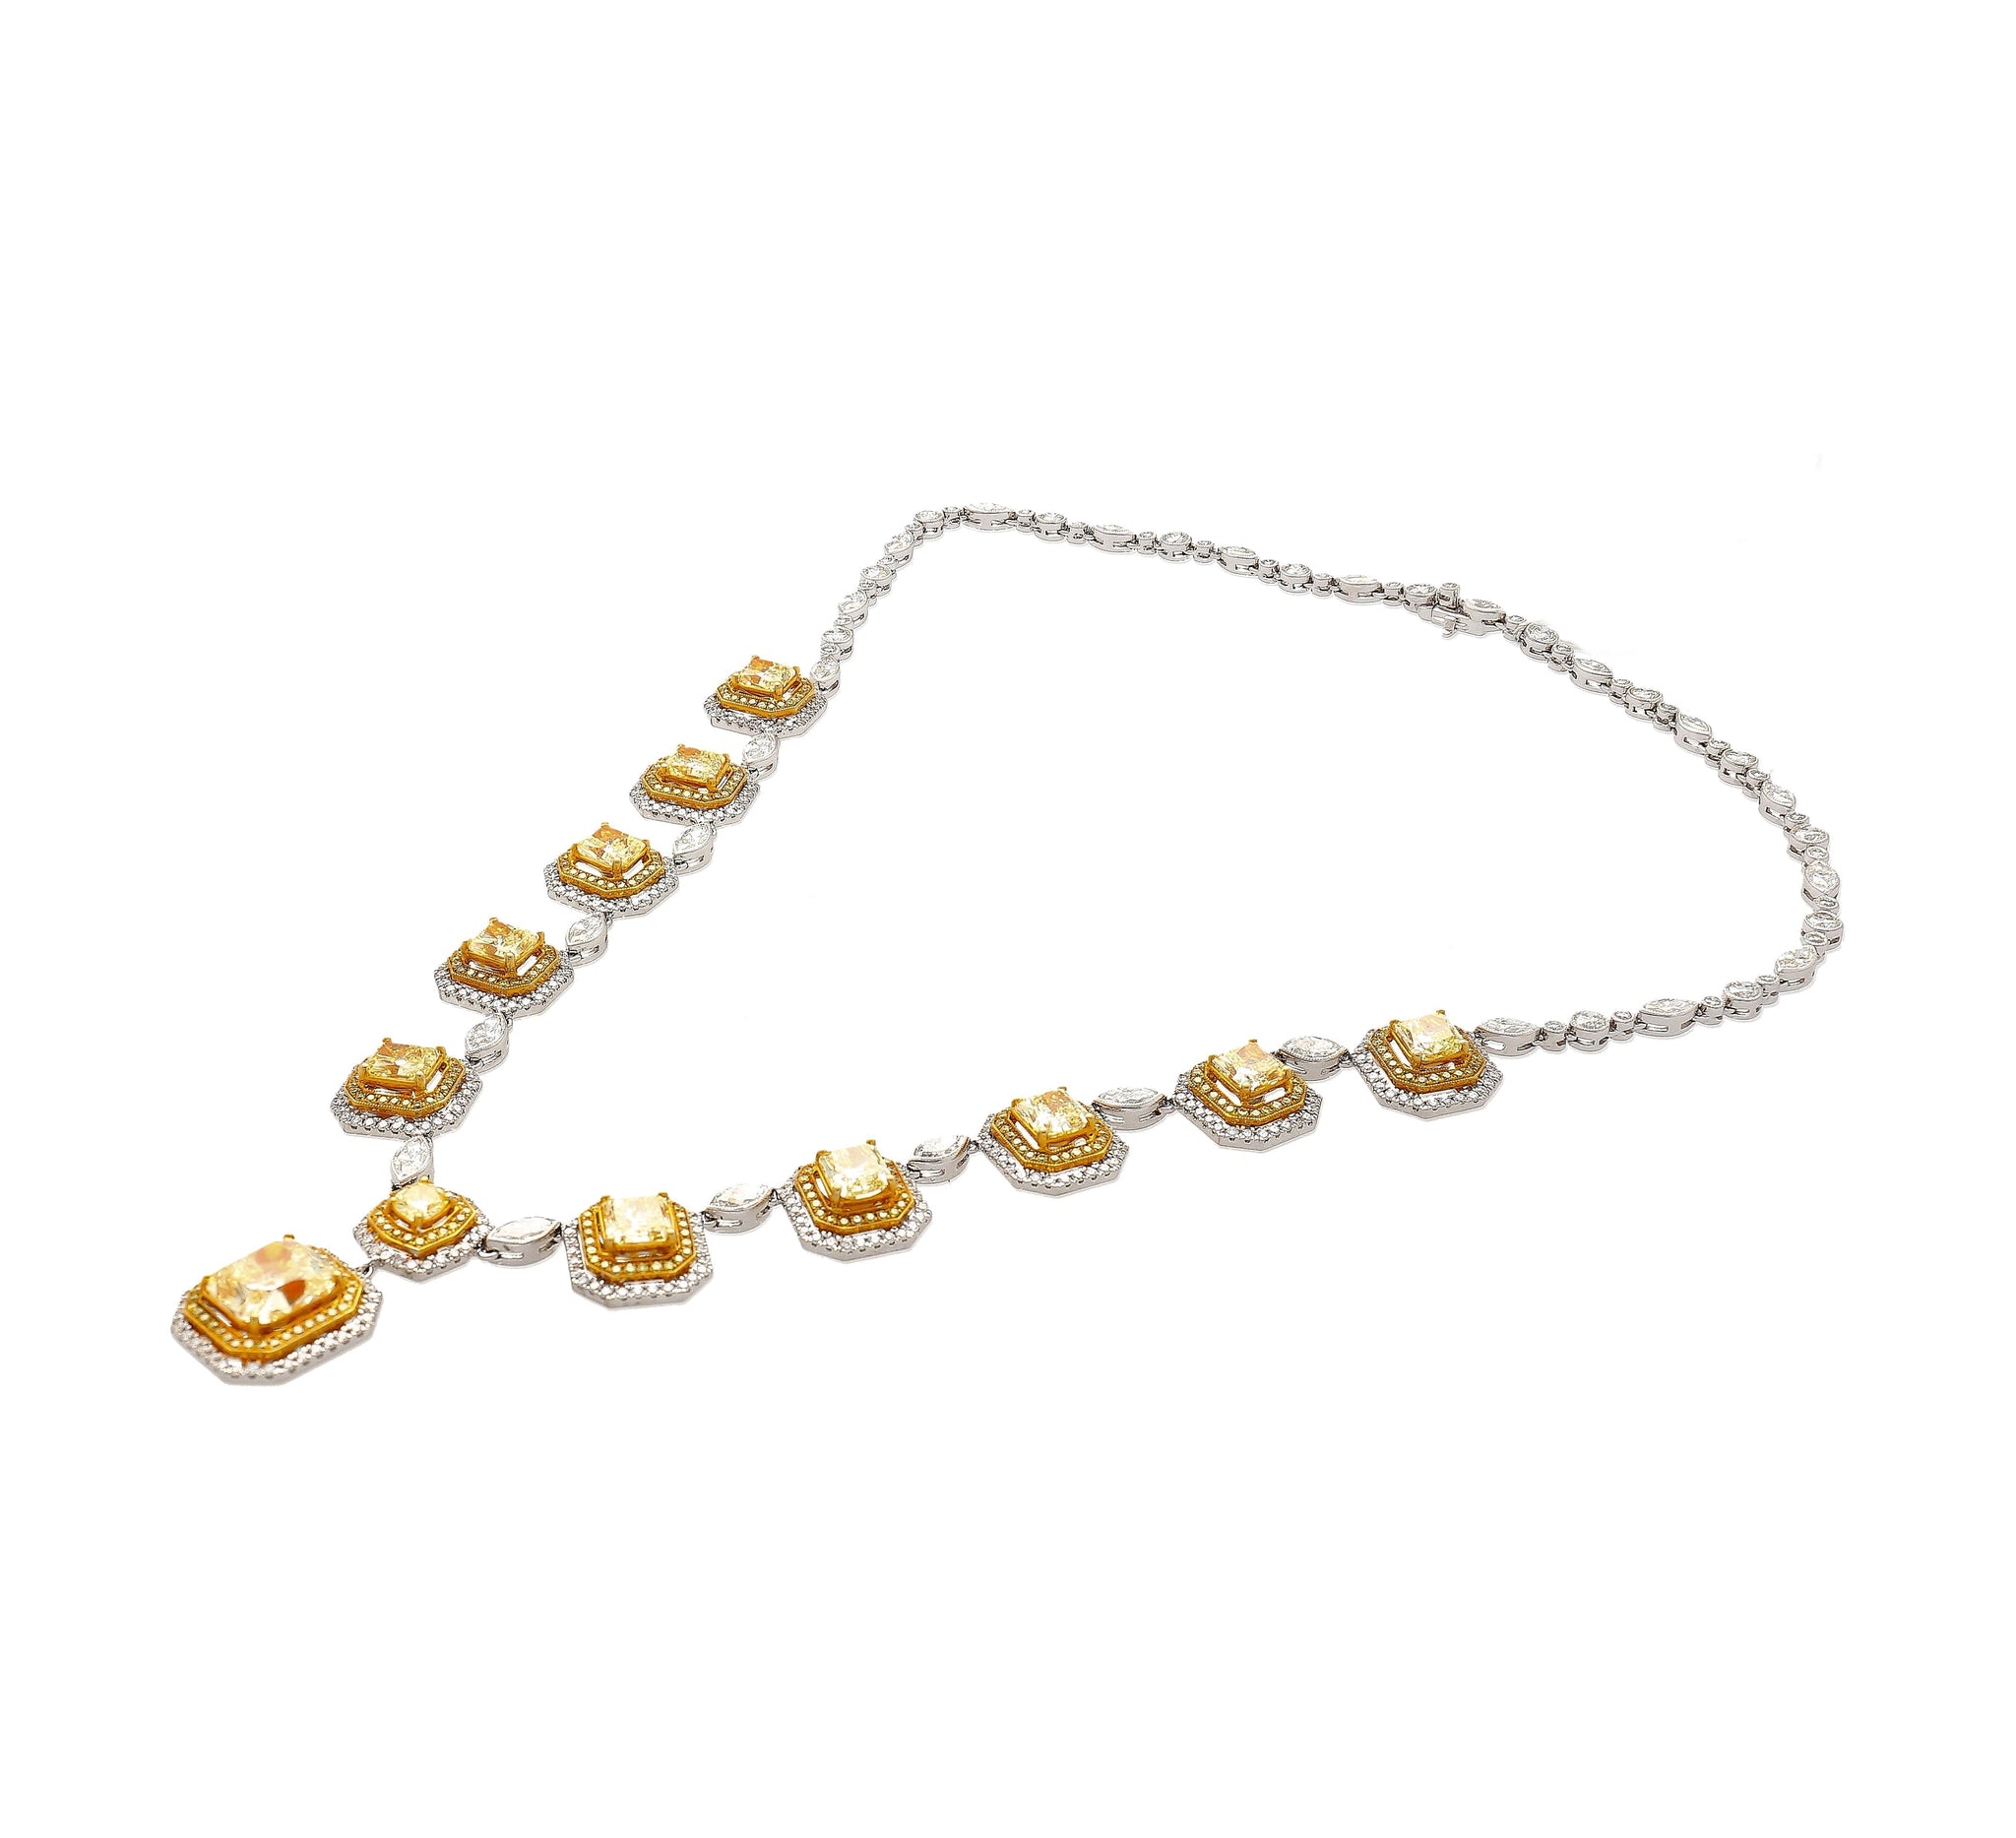 Magnificent GIA Certified 25 Carat Total Natural Fancy Yellow Diamond Necklace in 18K Gold